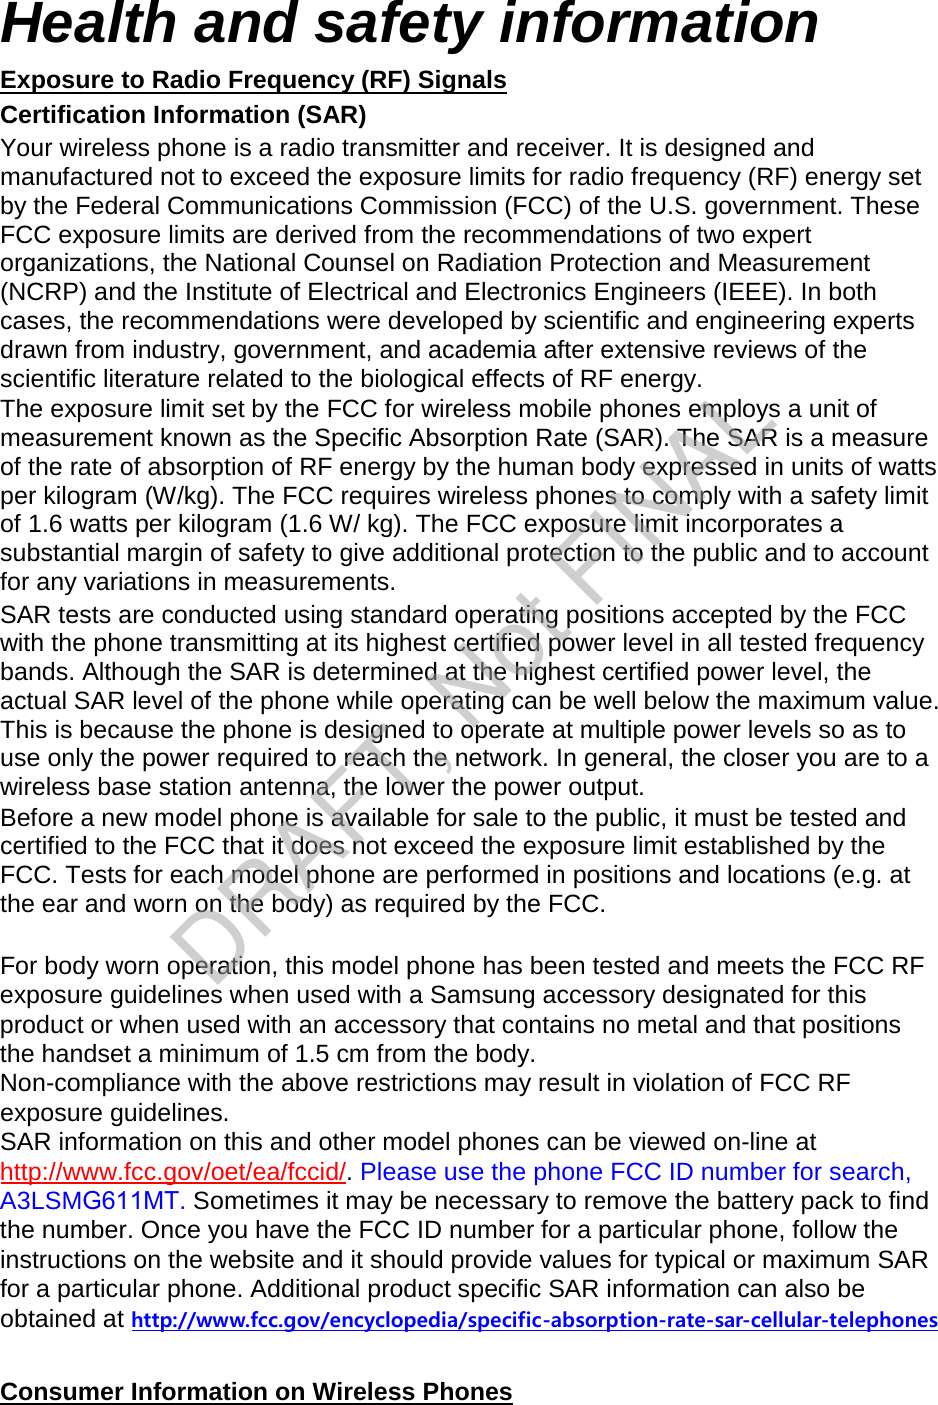 Health and safety information Exposure to Radio Frequency (RF) Signals Certification Information (SAR) Your wireless phone is a radio transmitter and receiver. It is designed and manufactured not to exceed the exposure limits for radio frequency (RF) energy set by the Federal Communications Commission (FCC) of the U.S. government. These FCC exposure limits are derived from the recommendations of two expert organizations, the National Counsel on Radiation Protection and Measurement (NCRP) and the Institute of Electrical and Electronics Engineers (IEEE). In both cases, the recommendations were developed by scientific and engineering experts drawn from industry, government, and academia after extensive reviews of the scientific literature related to the biological effects of RF energy. The exposure limit set by the FCC for wireless mobile phones employs a unit of measurement known as the Specific Absorption Rate (SAR). The SAR is a measure of the rate of absorption of RF energy by the human body expressed in units of watts per kilogram (W/kg). The FCC requires wireless phones to comply with a safety limit of 1.6 watts per kilogram (1.6 W/ kg). The FCC exposure limit incorporates a substantial margin of safety to give additional protection to the public and to account for any variations in measurements. SAR tests are conducted using standard operating positions accepted by the FCC with the phone transmitting at its highest certified power level in all tested frequency bands. Although the SAR is determined at the highest certified power level, the actual SAR level of the phone while operating can be well below the maximum value. This is because the phone is designed to operate at multiple power levels so as to use only the power required to reach the network. In general, the closer you are to a wireless base station antenna, the lower the power output. Before a new model phone is available for sale to the public, it must be tested and certified to the FCC that it does not exceed the exposure limit established by the FCC. Tests for each model phone are performed in positions and locations (e.g. at the ear and worn on the body) as required by the FCC.     For body worn operation, this model phone has been tested and meets the FCC RF exposure guidelines when used with a Samsung accessory designated for this product or when used with an accessory that contains no metal and that positions the handset a minimum of 1.5 cm from the body.  Non-compliance with the above restrictions may result in violation of FCC RF exposure guidelines. SAR information on this and other model phones can be viewed on-line at http://www.fcc.gov/oet/ea/fccid/. Please use the phone FCC ID number for search, A3LSMG611MT. Sometimes it may be necessary to remove the battery pack to find the number. Once you have the FCC ID number for a particular phone, follow the instructions on the website and it should provide values for typical or maximum SAR for a particular phone. Additional product specific SAR information can also be obtained at http://www.fcc.gov/encyclopedia/specific-absorption-rate-sar-cellular-telephonesConsumer Information on Wireless Phones DRAFT, Not FINAL